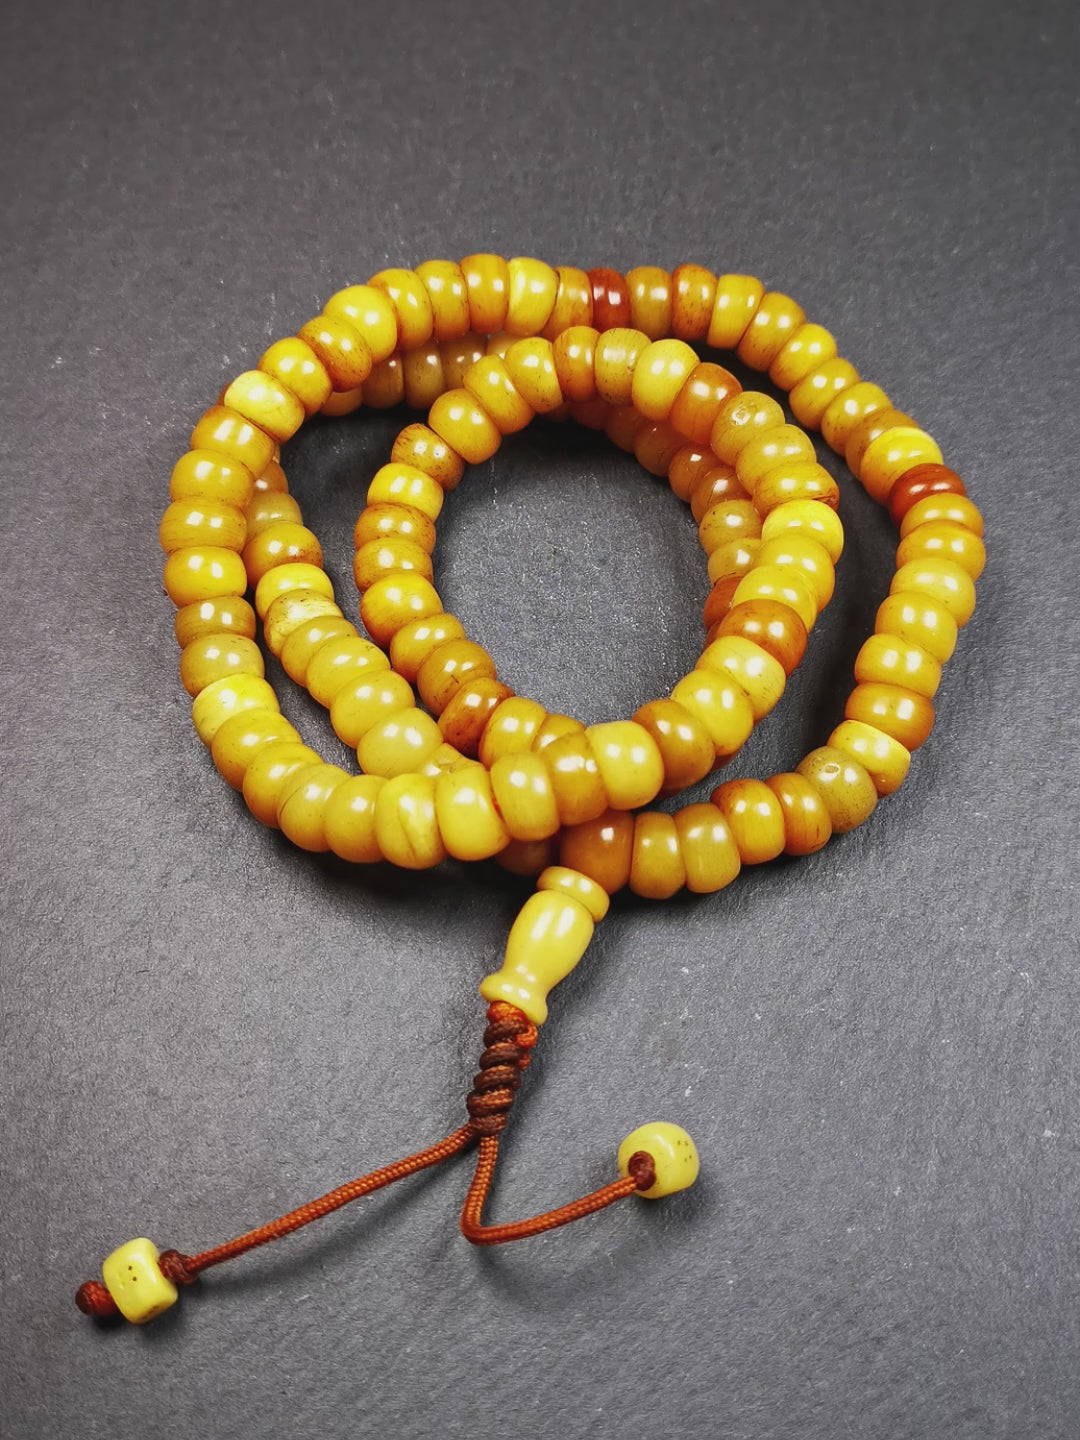 This mala was made by Tibetan craftsmen,about 20 years old. It is made of yak bone, yellow color,108 barrel cut beads diameter of 10mm / 0.4",circumference is 64cm / 25.2",1 guru bead and 2 dice pendant beads.